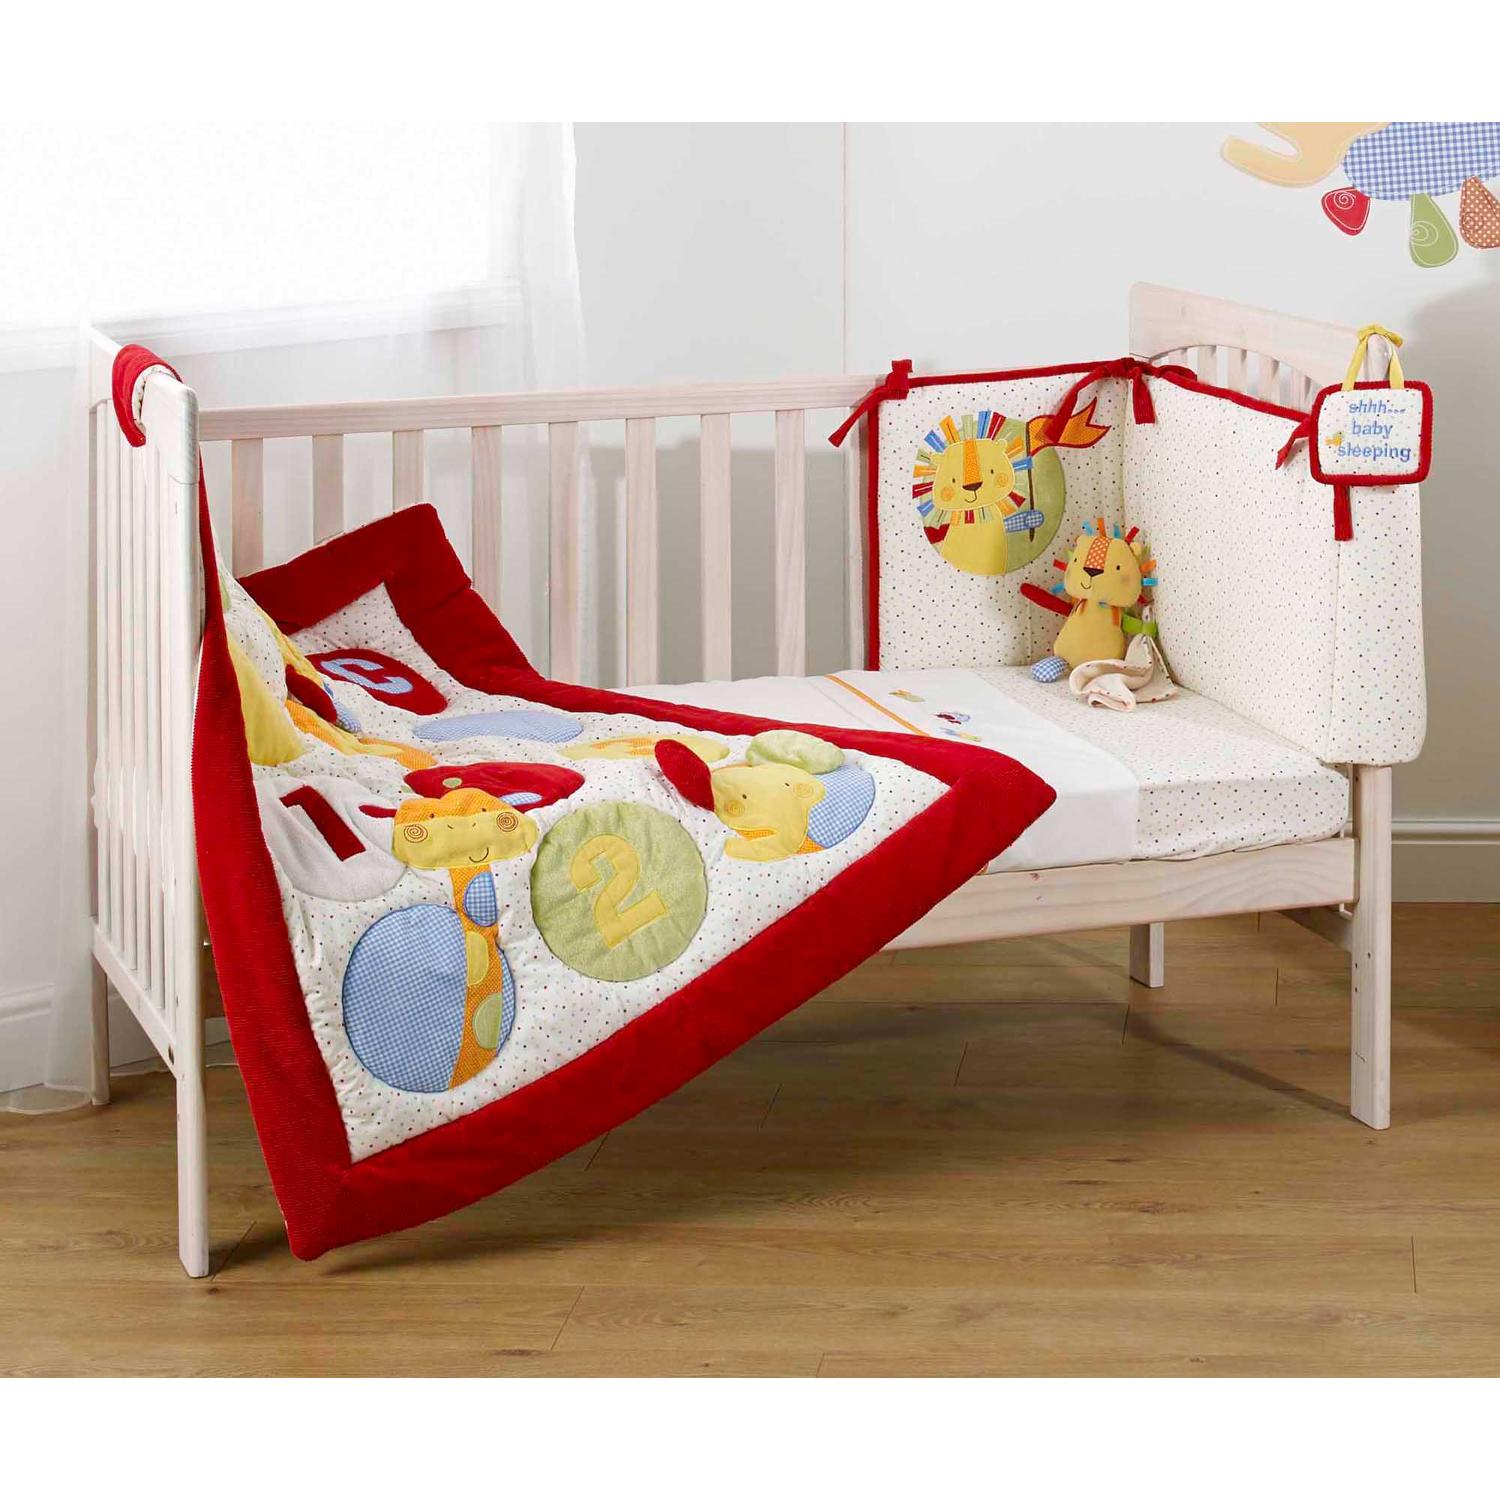 cot bedding sets ... cot bed set. hover to zoom EWLCQKQ